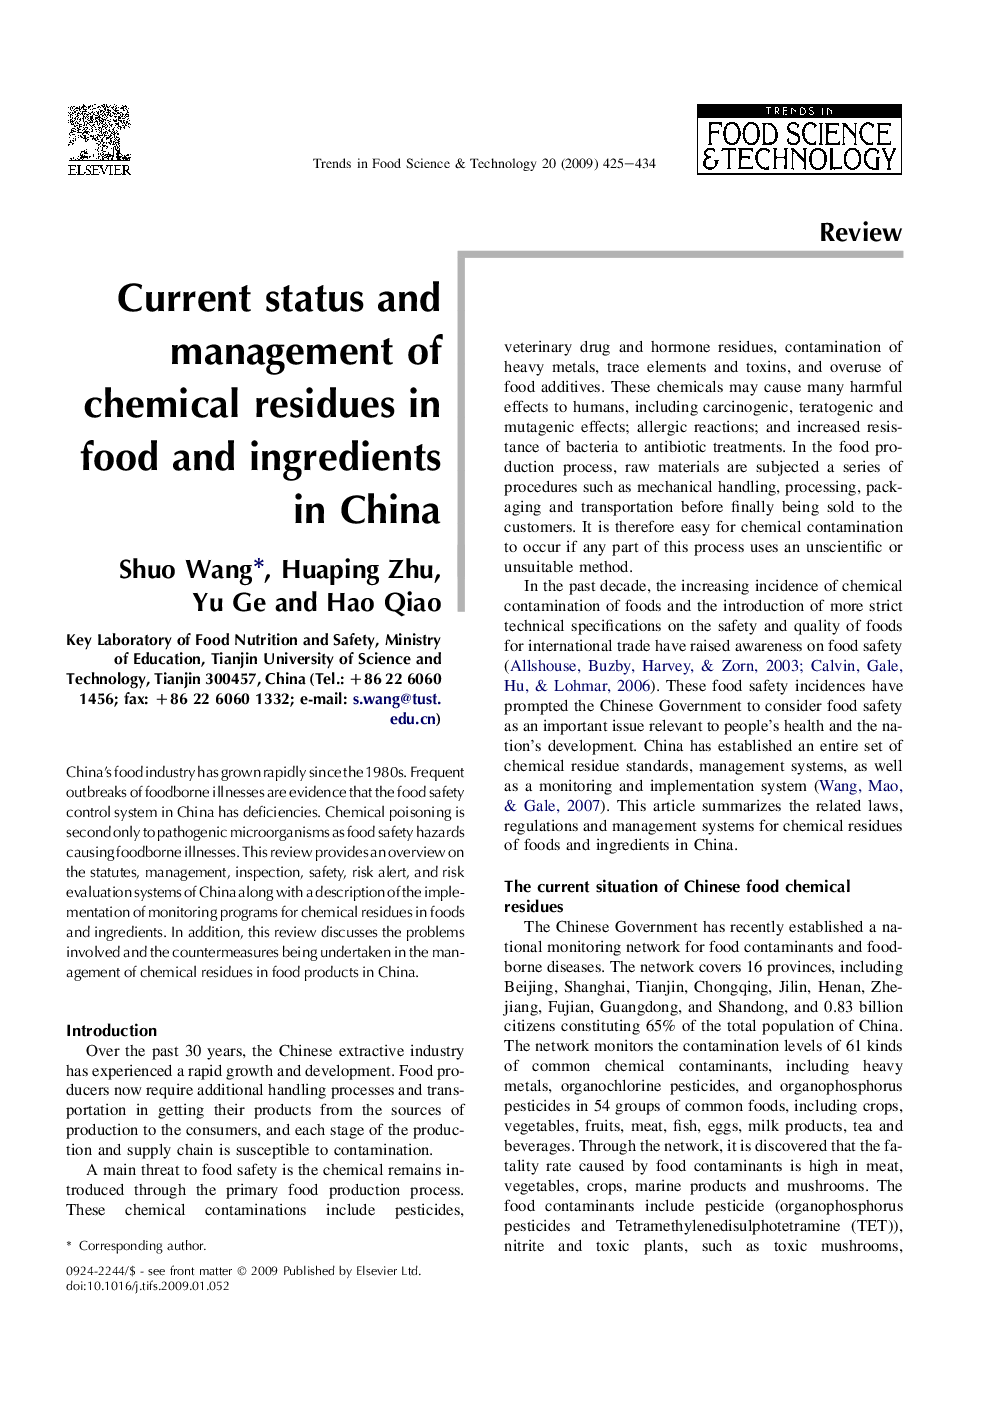 Current status and management of chemical residues in food and ingredients in China